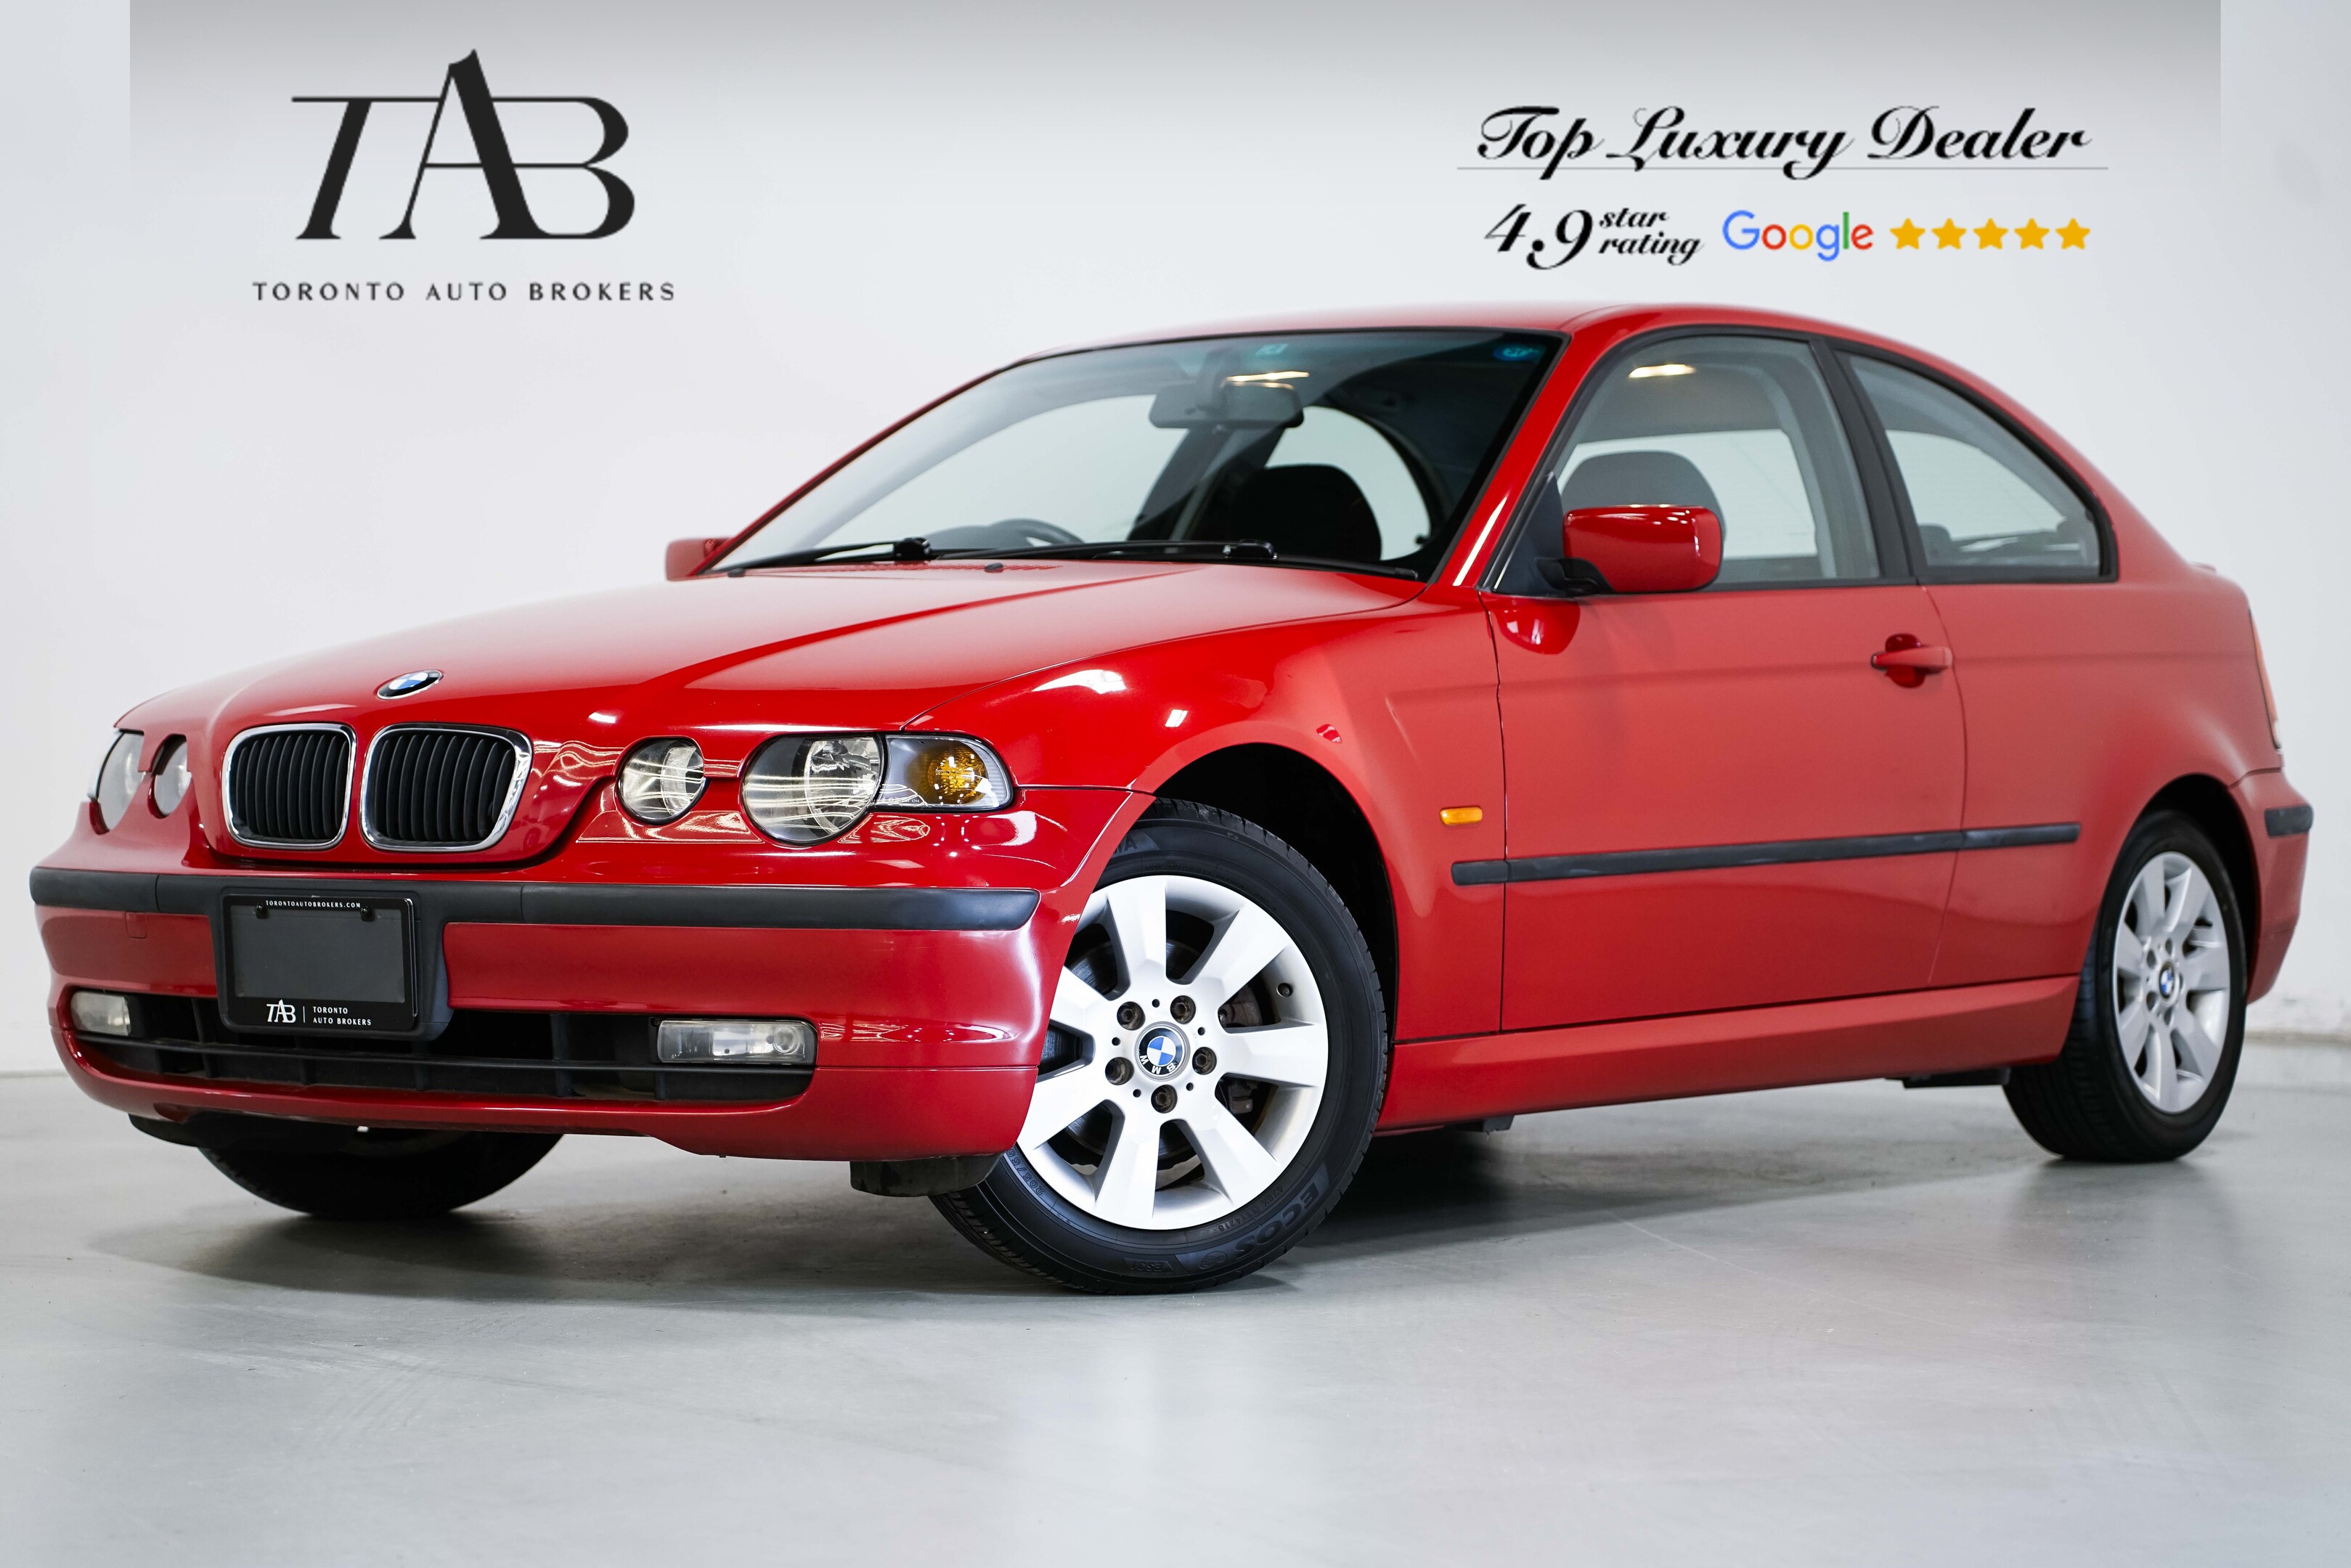 2005 BMW 318TI COMPACT | RIGHT HAND DRIVING | BLUETOOTH 